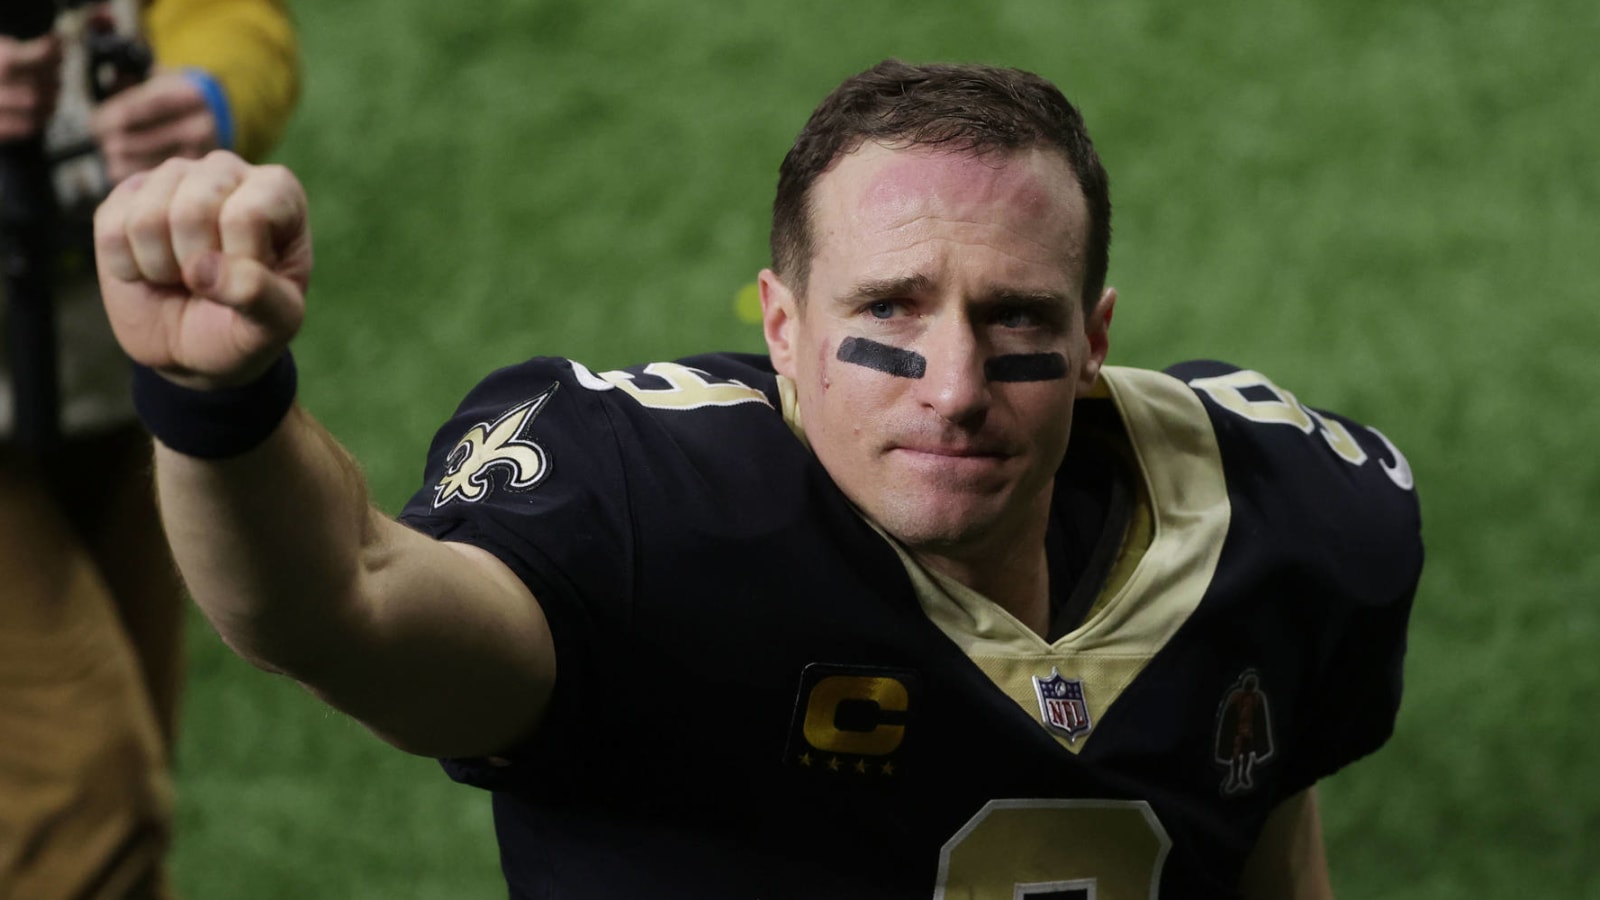 Trainer posts video of Brees workout, hints at QB returning?